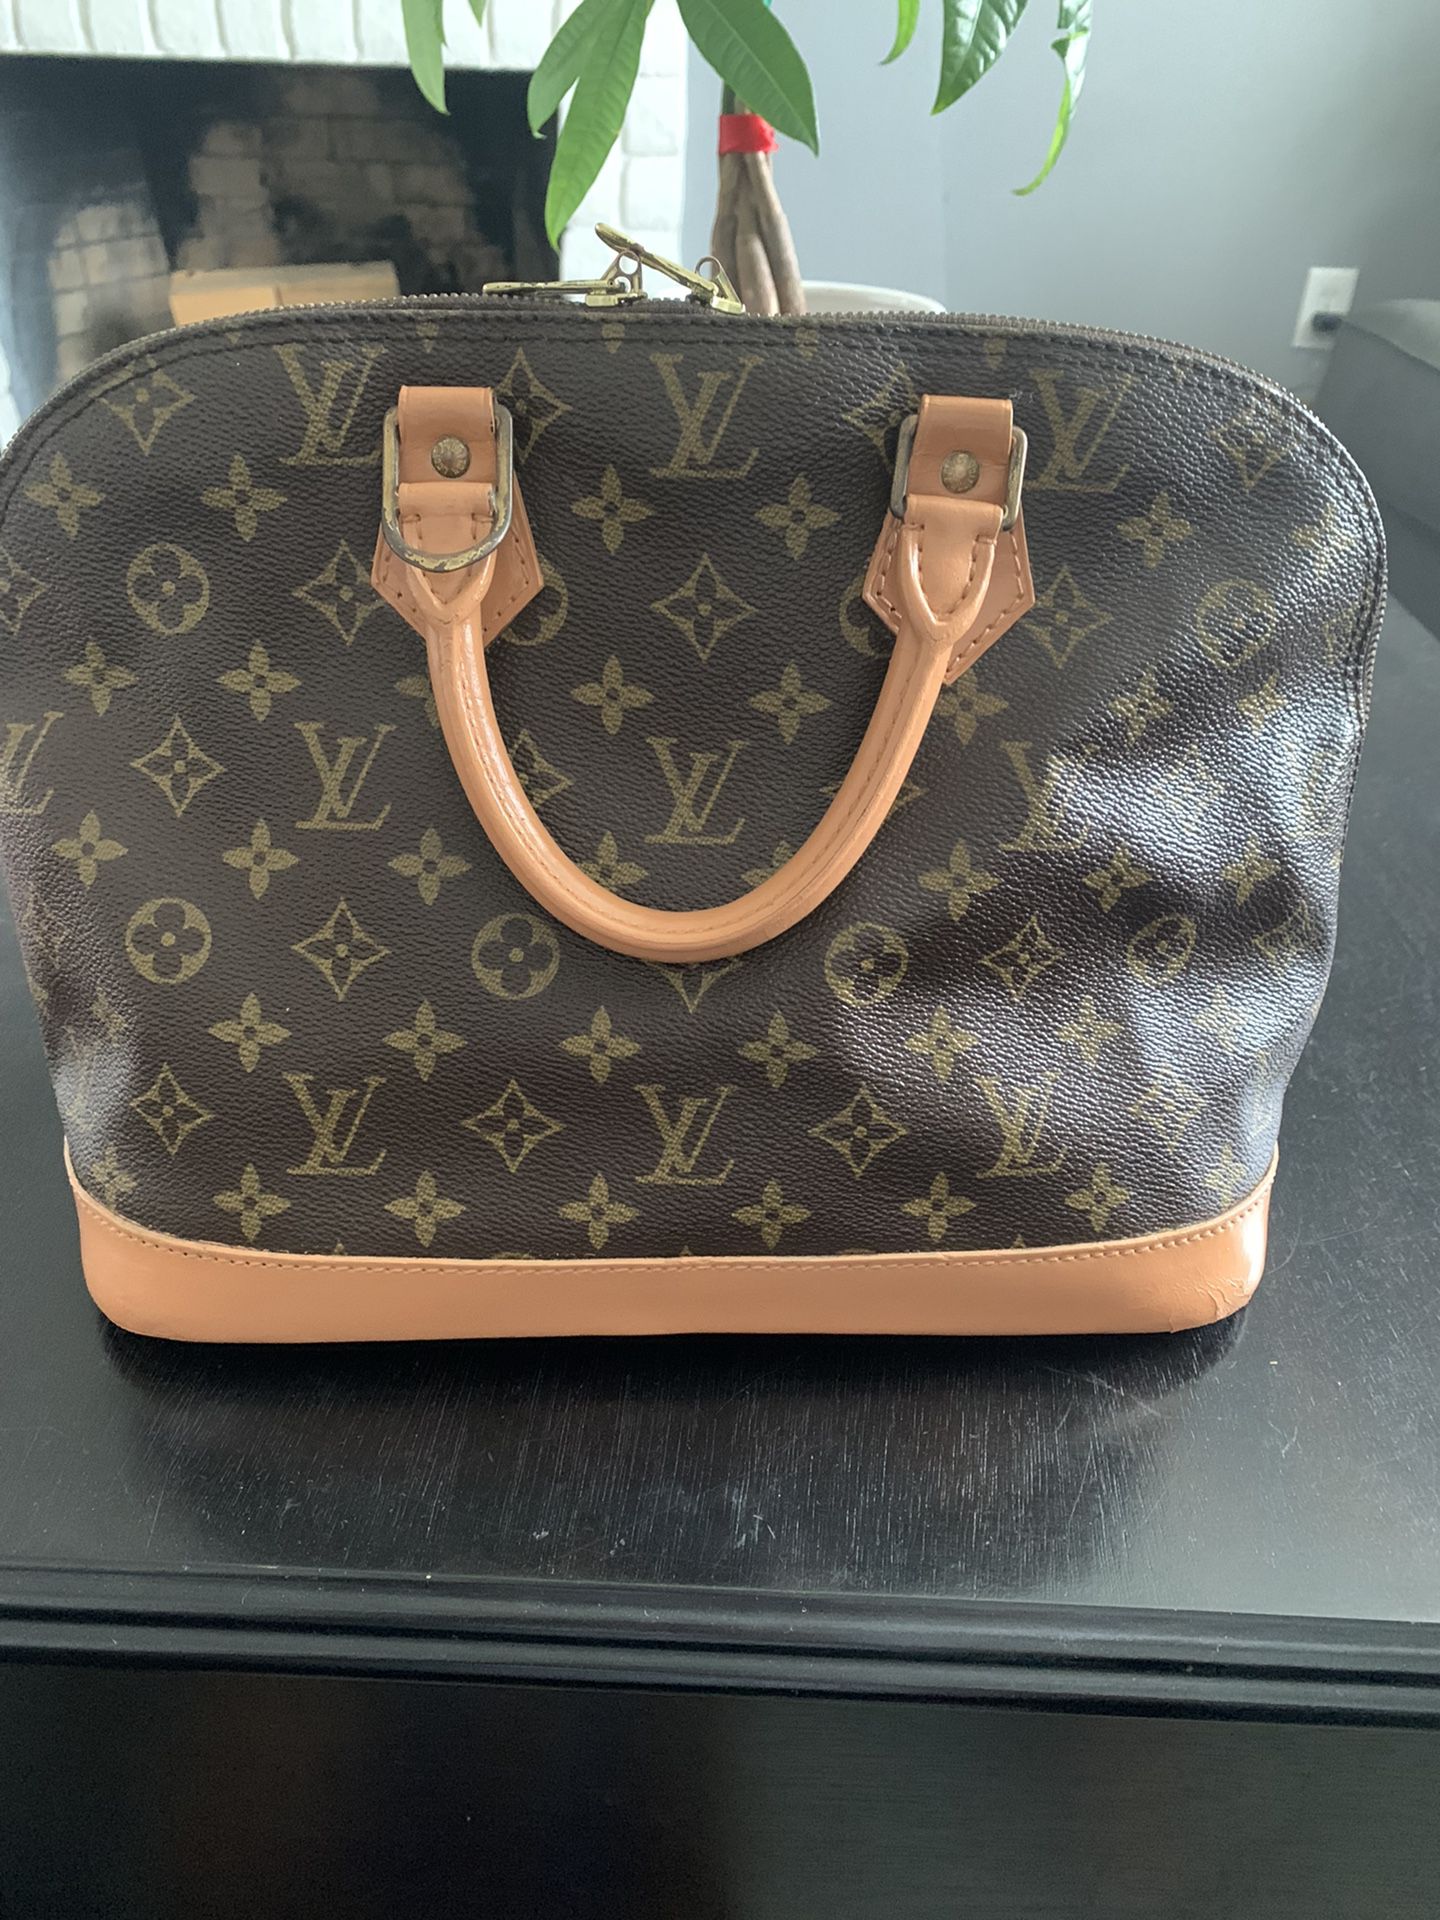 Louis Vuitton Monogram Chain Necklace for Sale in Los Angeles, CA - OfferUp